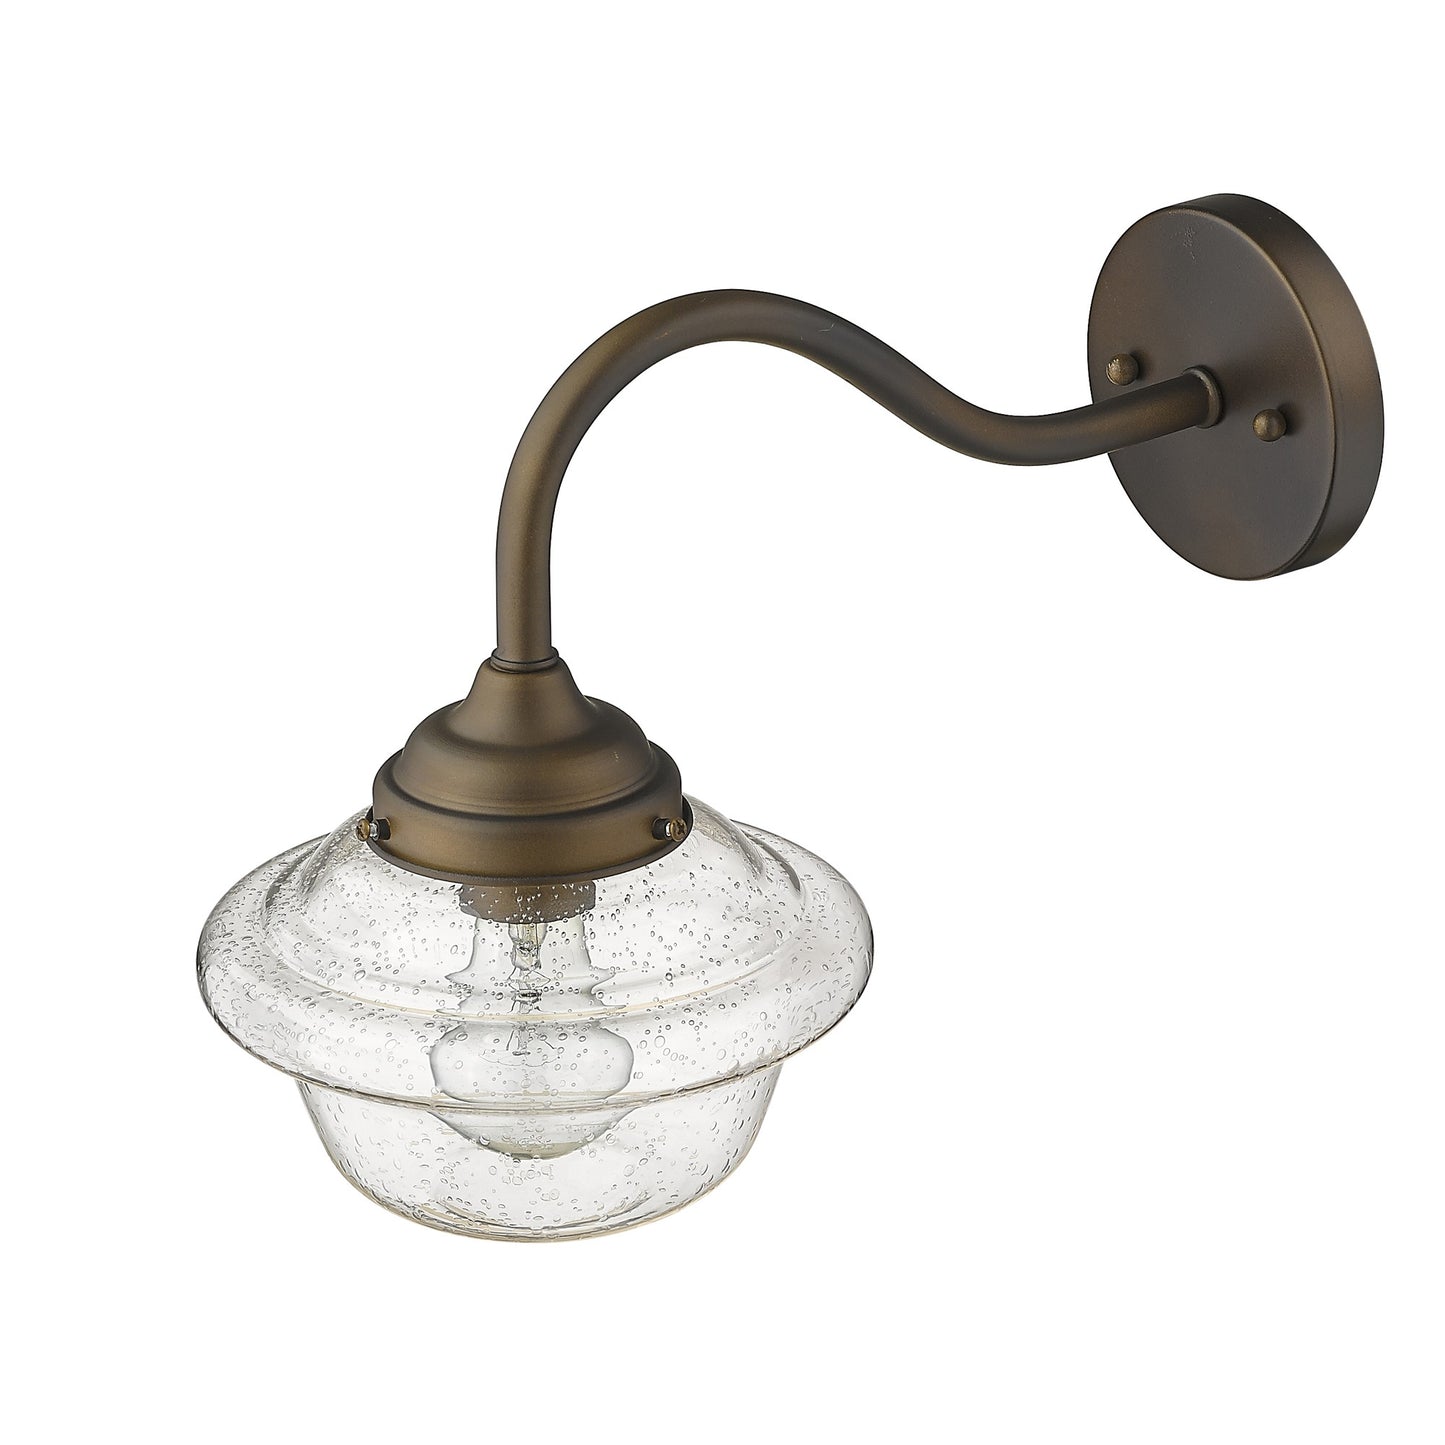 Burnished Bronze Vintage Schoolhouse Outdoor Wall Light